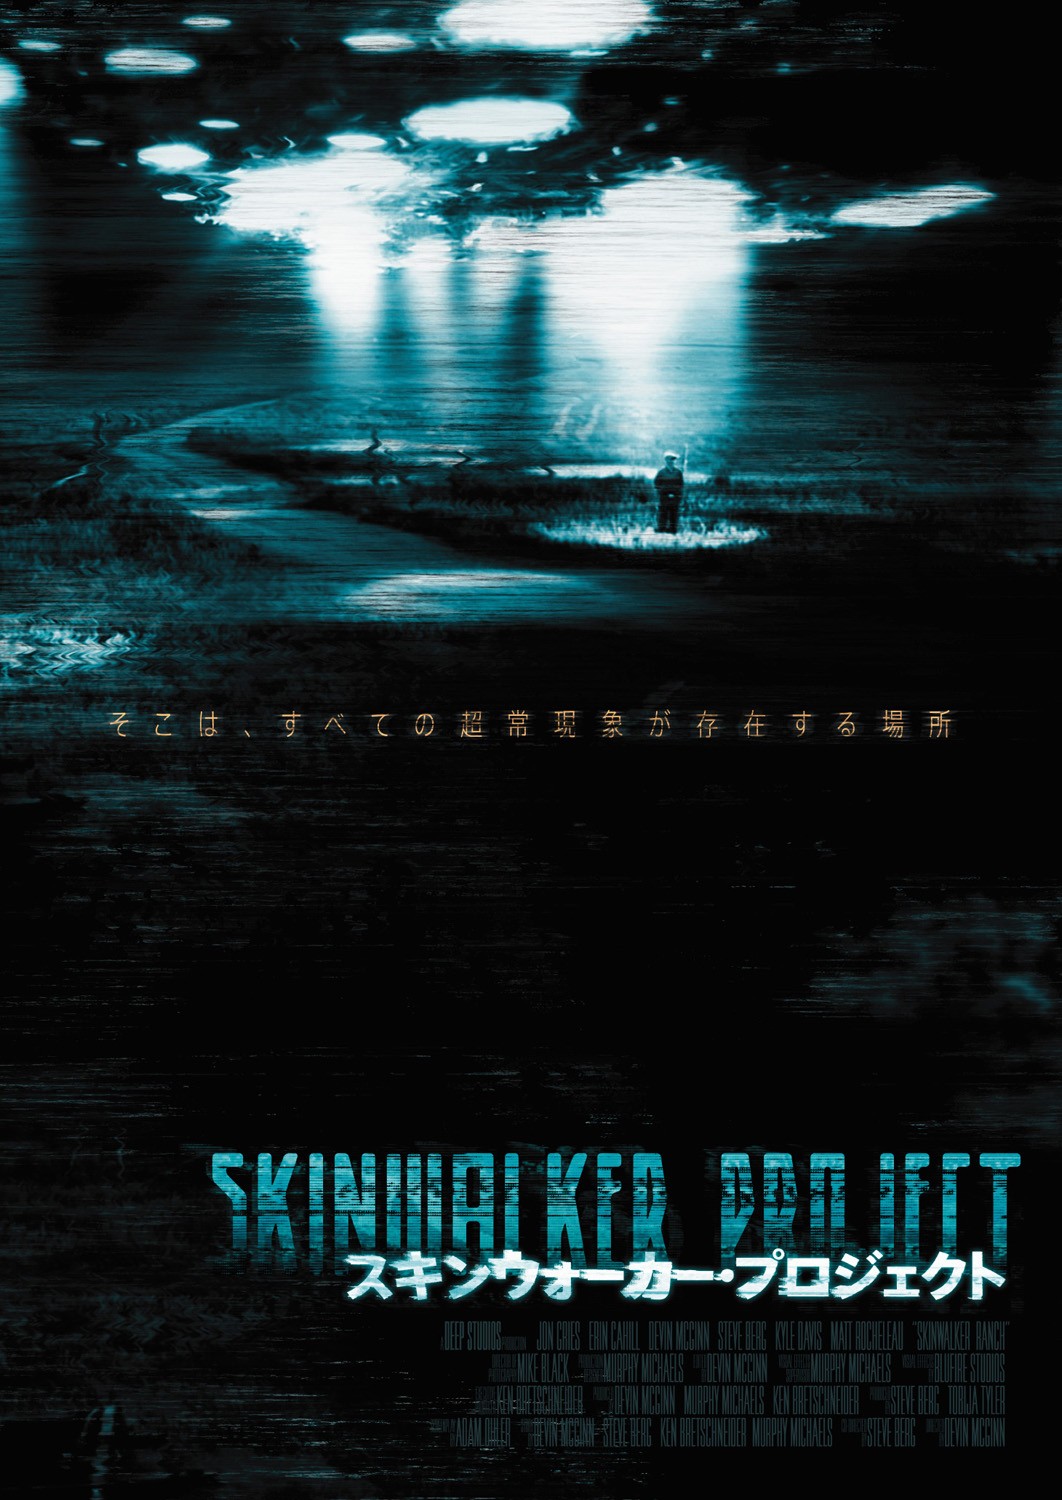 Extra Large Movie Poster Image for Skinwalker Ranch (#2 of 2)